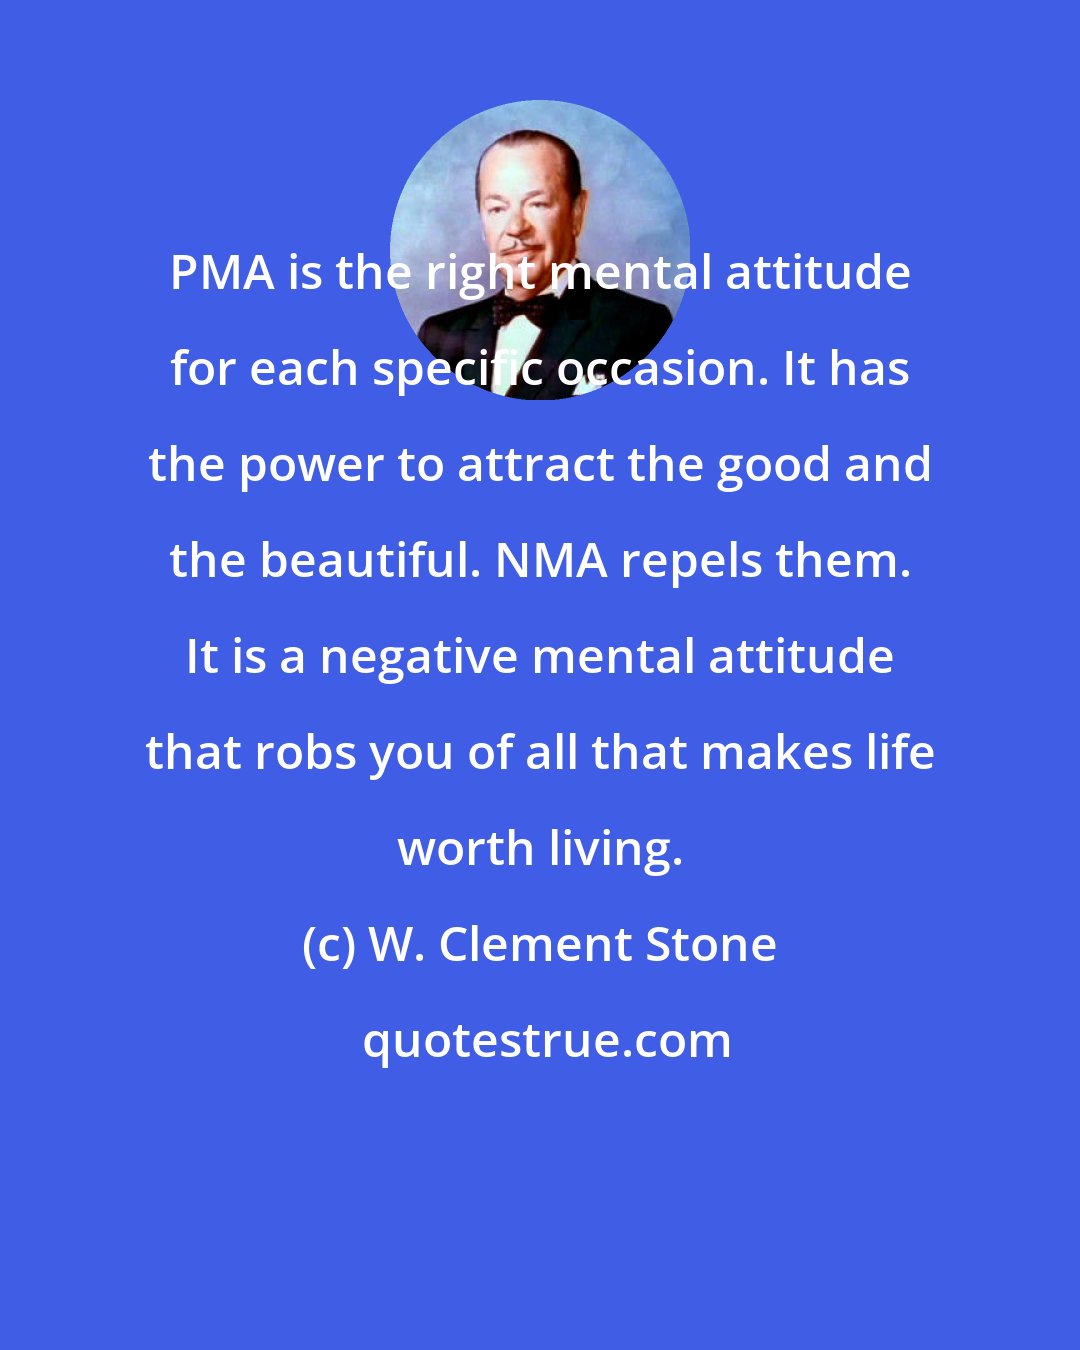 W. Clement Stone: PMA is the right mental attitude for each specific occasion. It has the power to attract the good and the beautiful. NMA repels them. It is a negative mental attitude that robs you of all that makes life worth living.